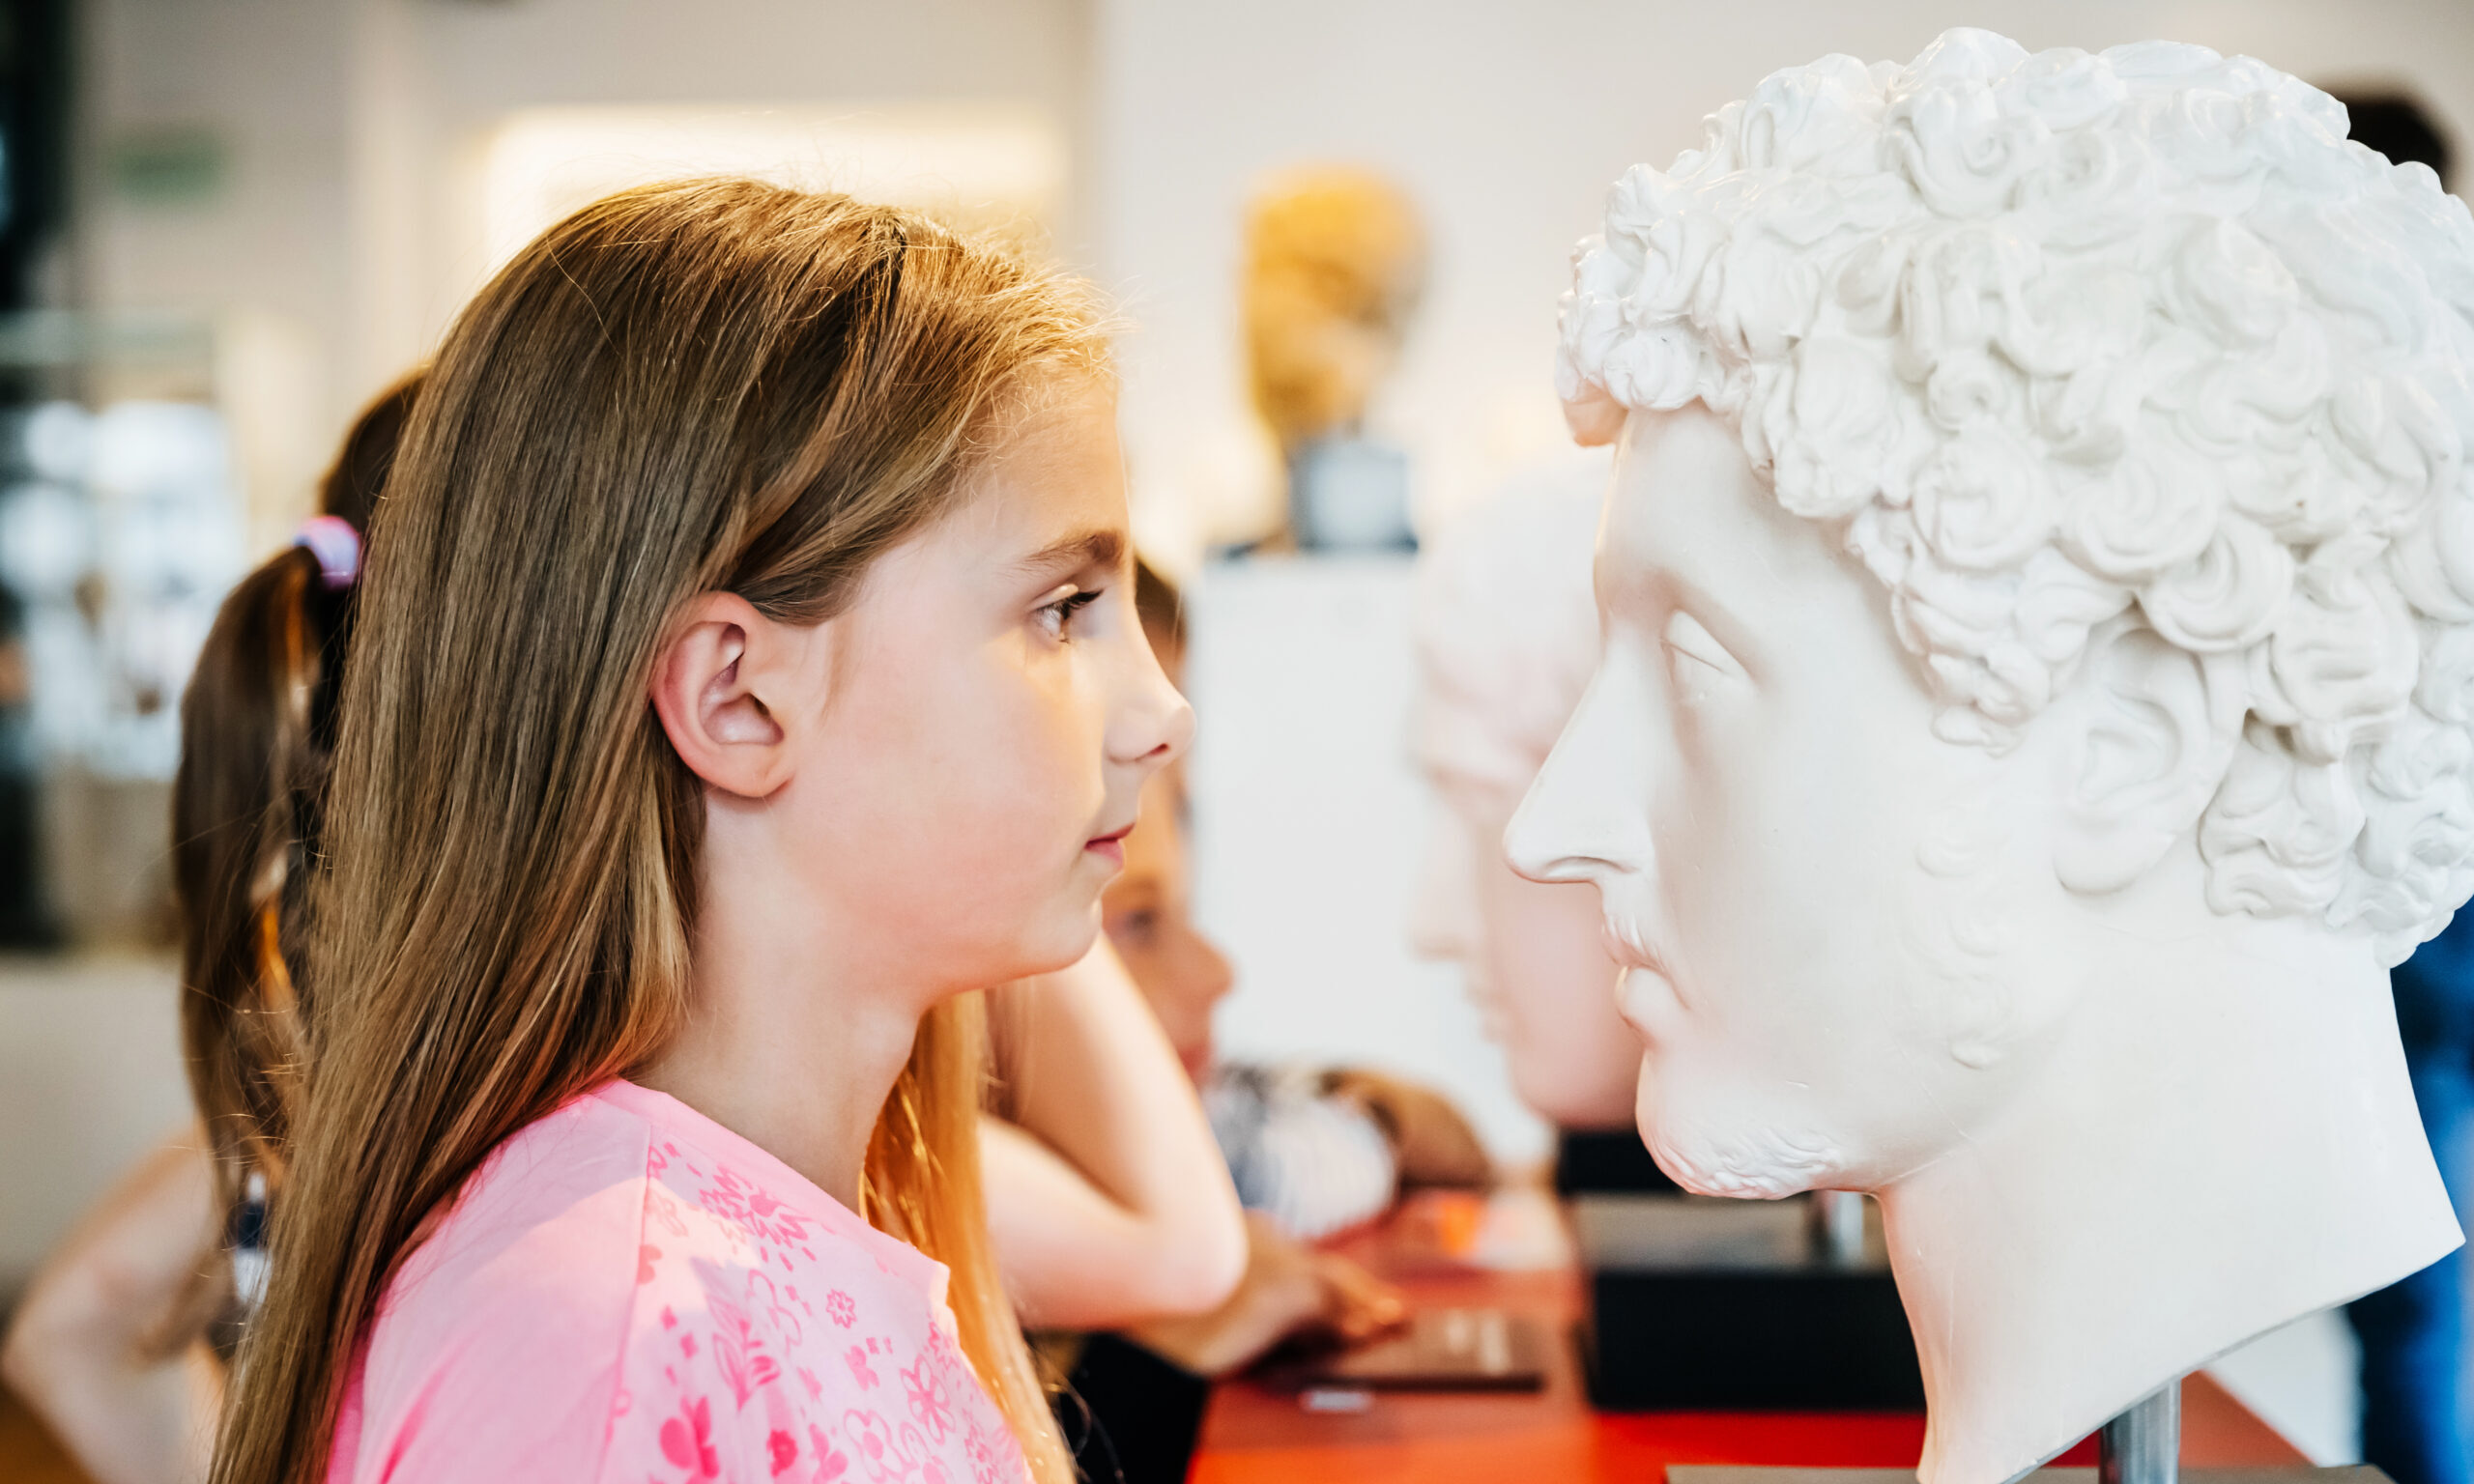 Young Girl Looking Closely At Classical Bust In Museum